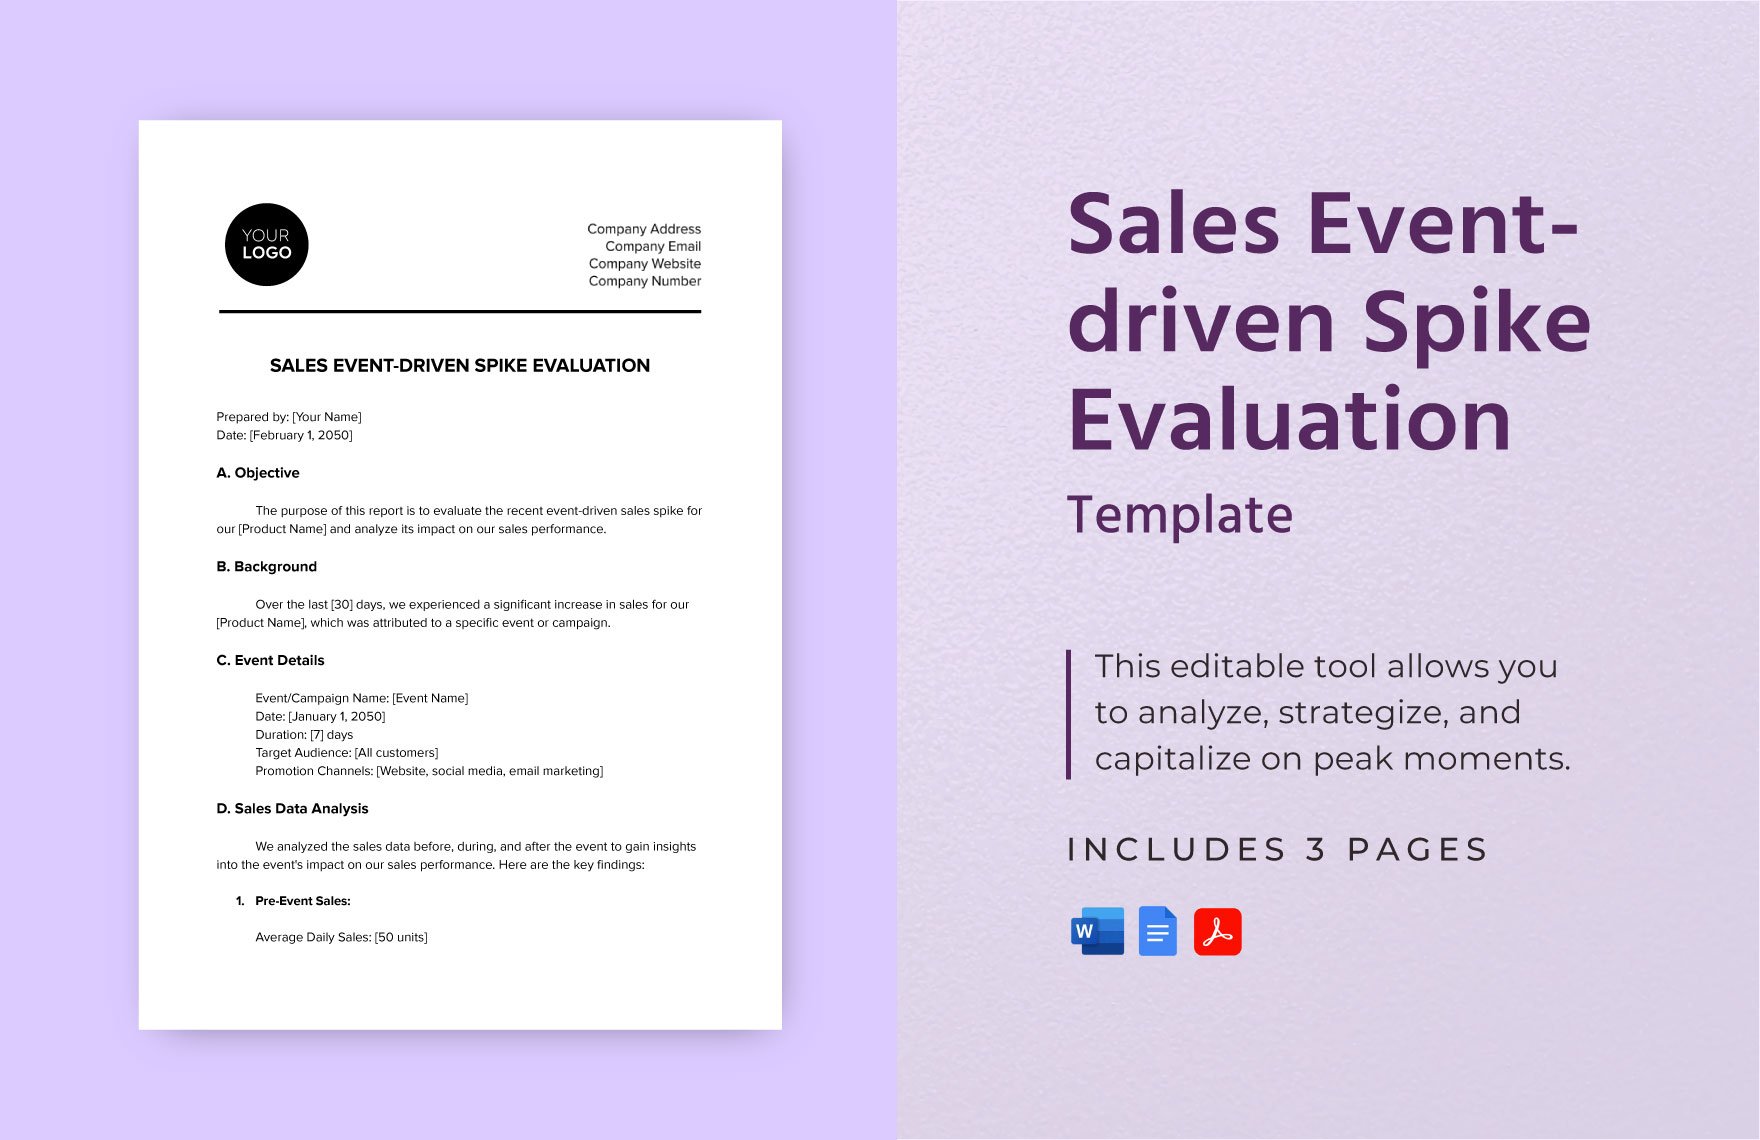 Sales Event-driven Spike Evaluation Template